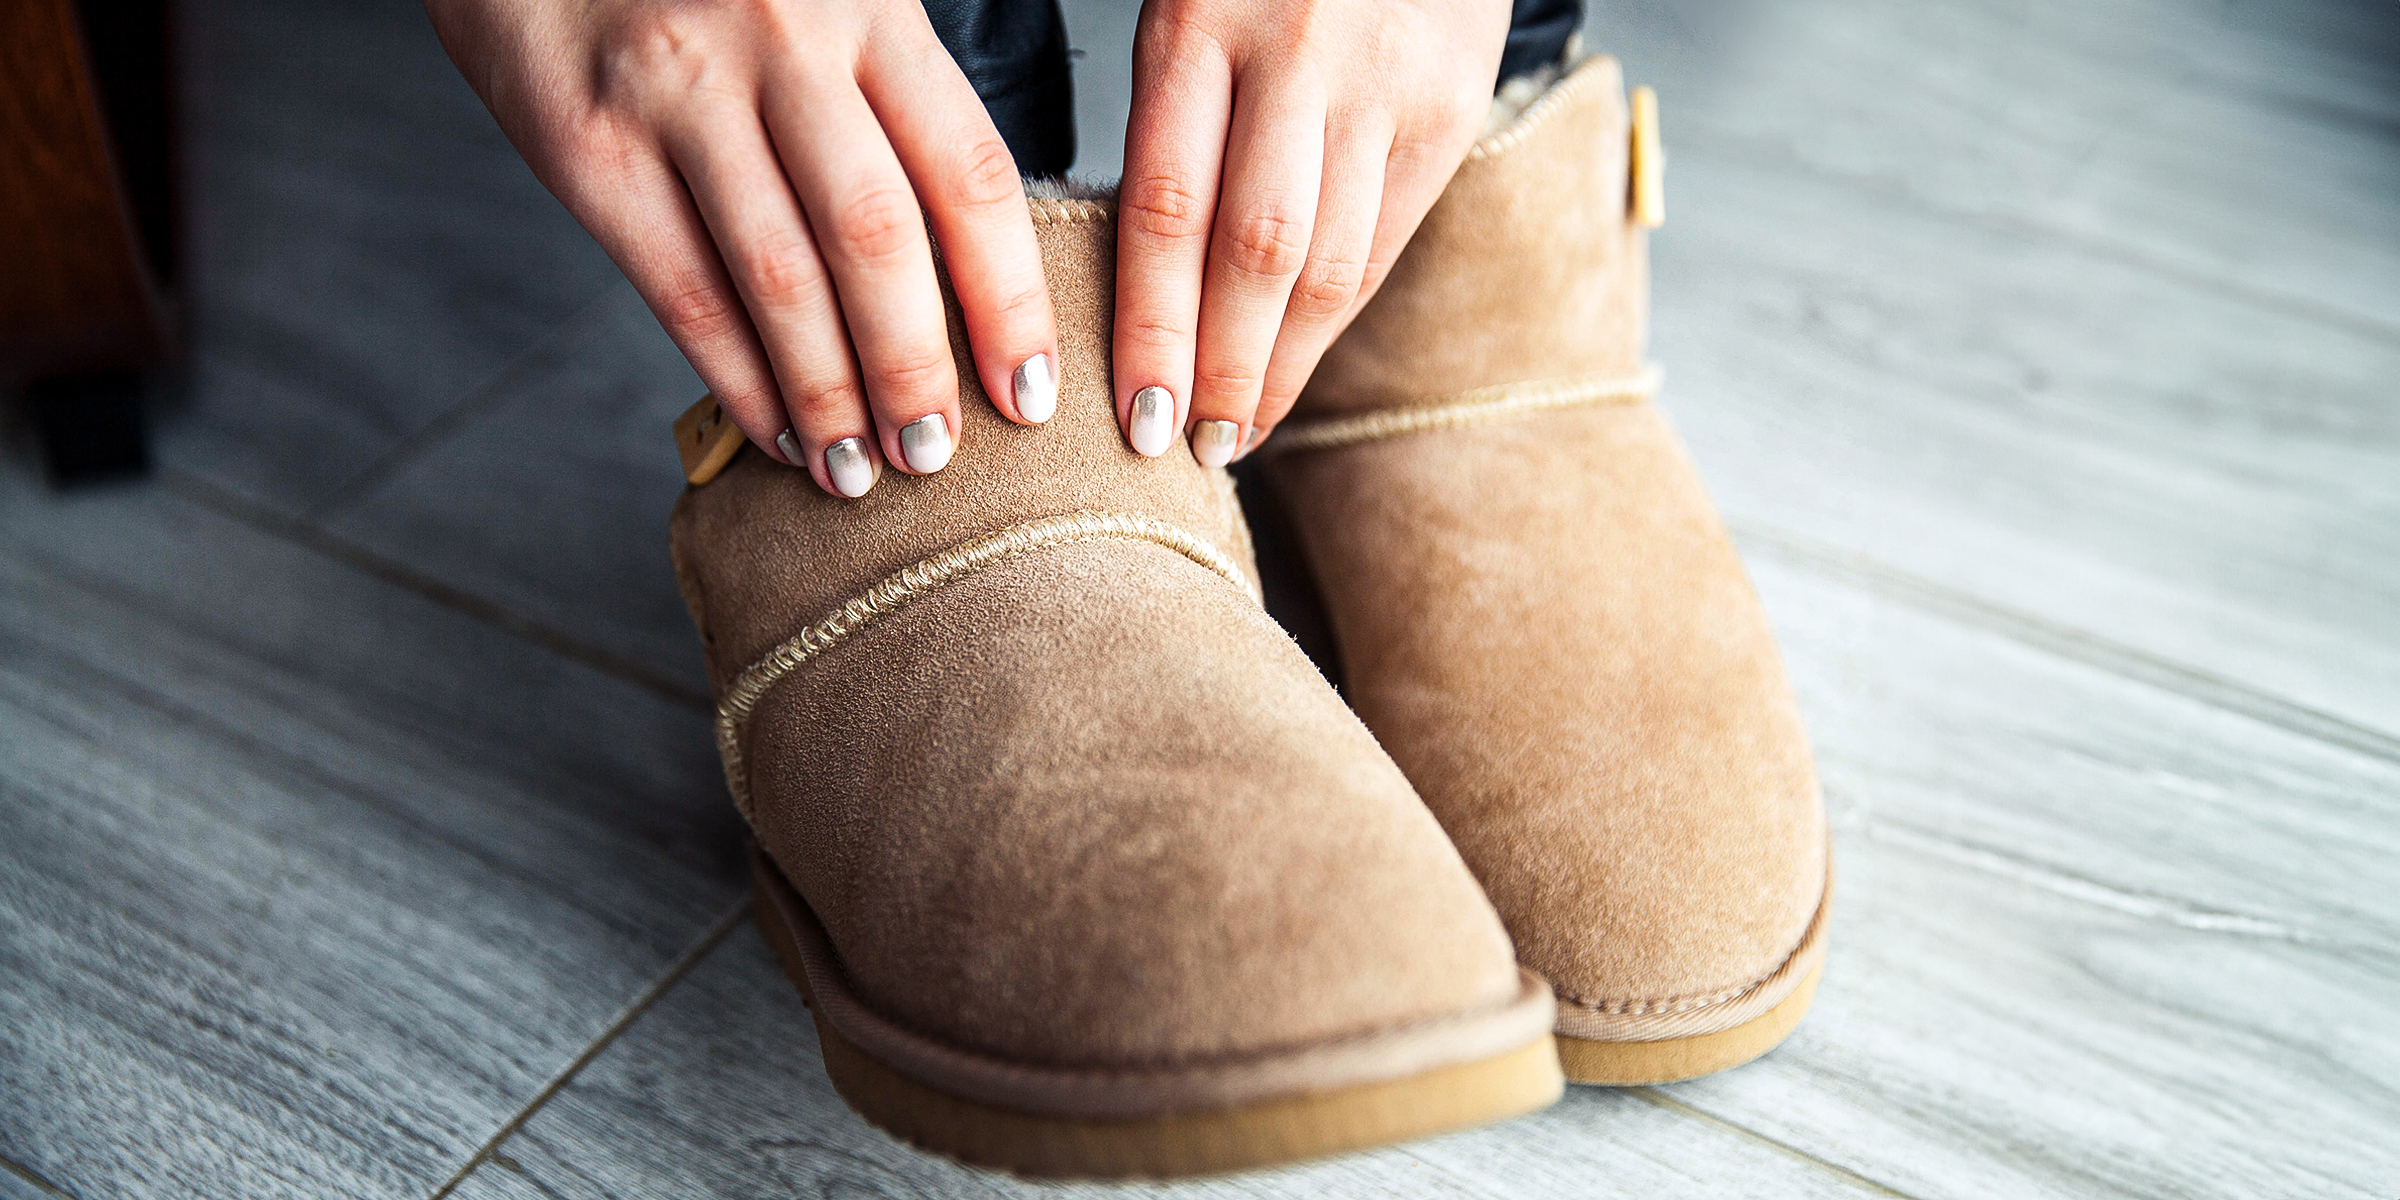 A person wearing Uggs | Source: Shutterstock